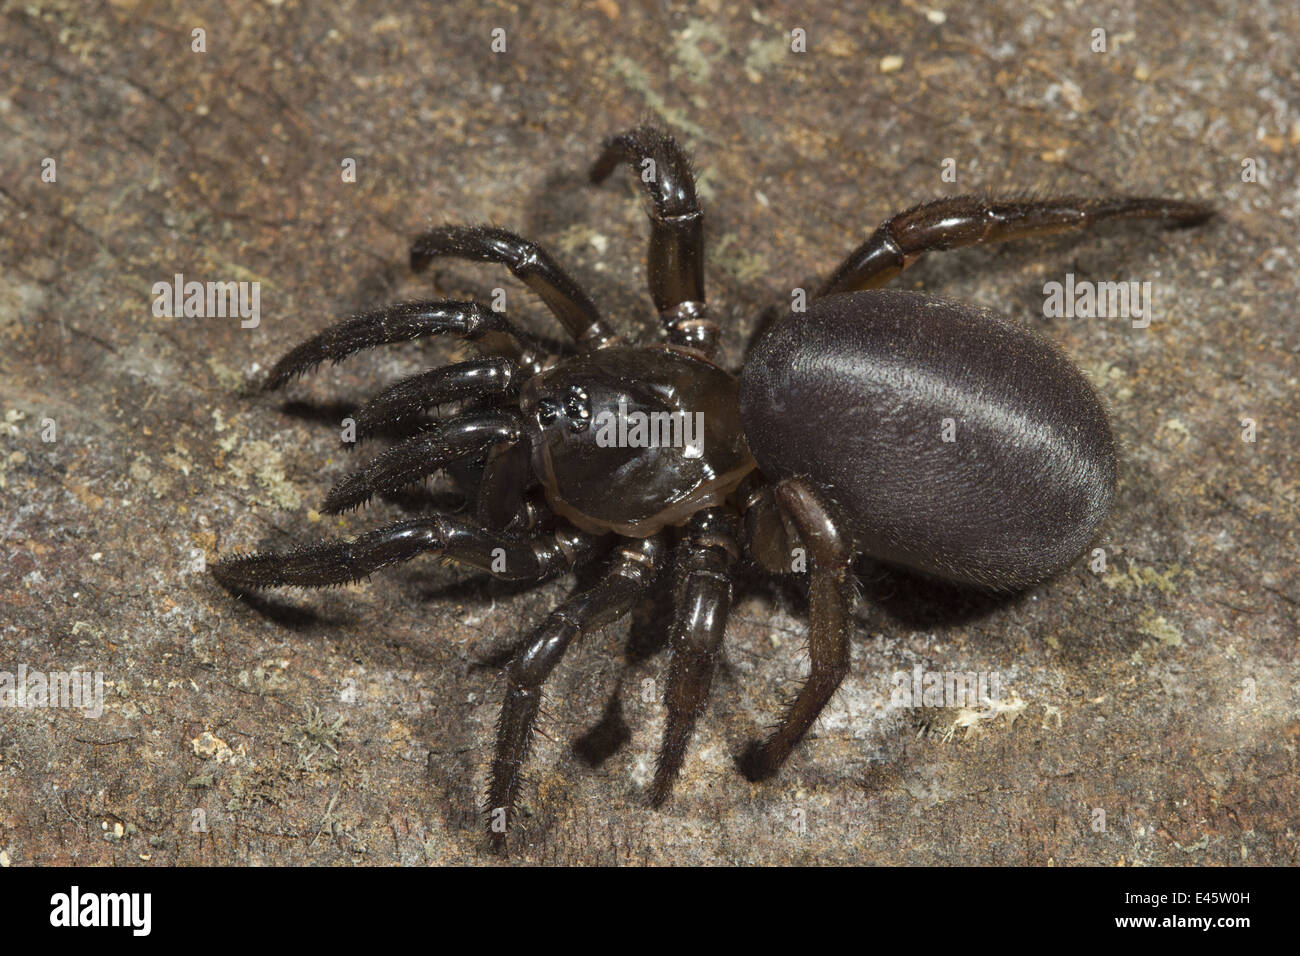 39 Trap Door Spider Stock Photos, High-Res Pictures, and Images